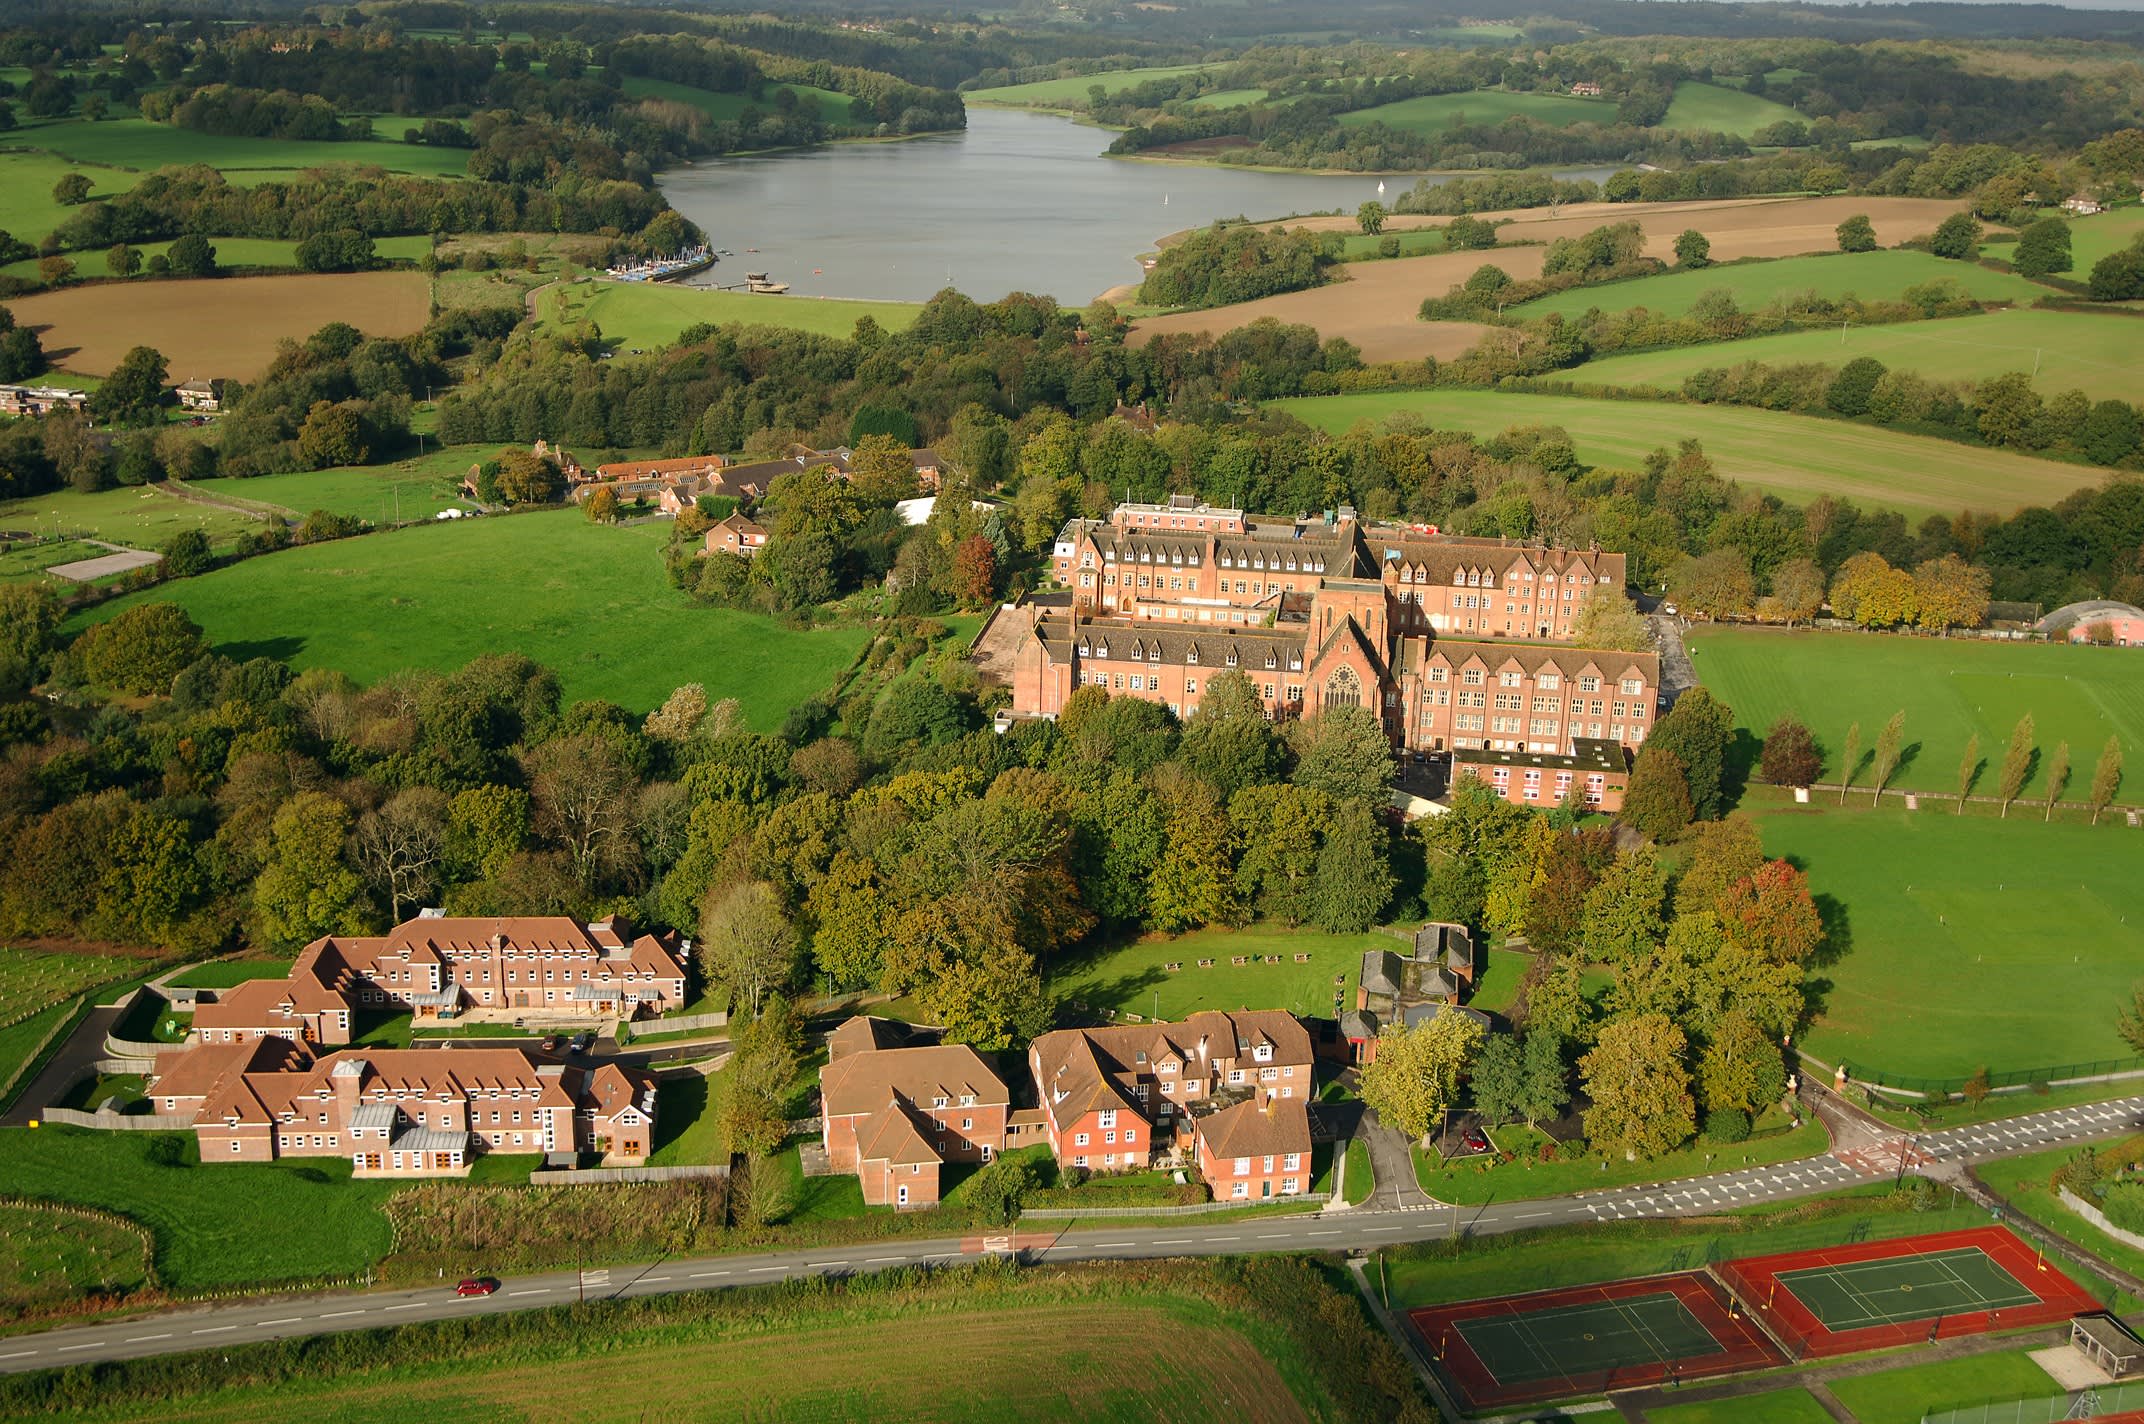 Ardingly College school camous is surrounded by beautiful nature and scenery including a lake.